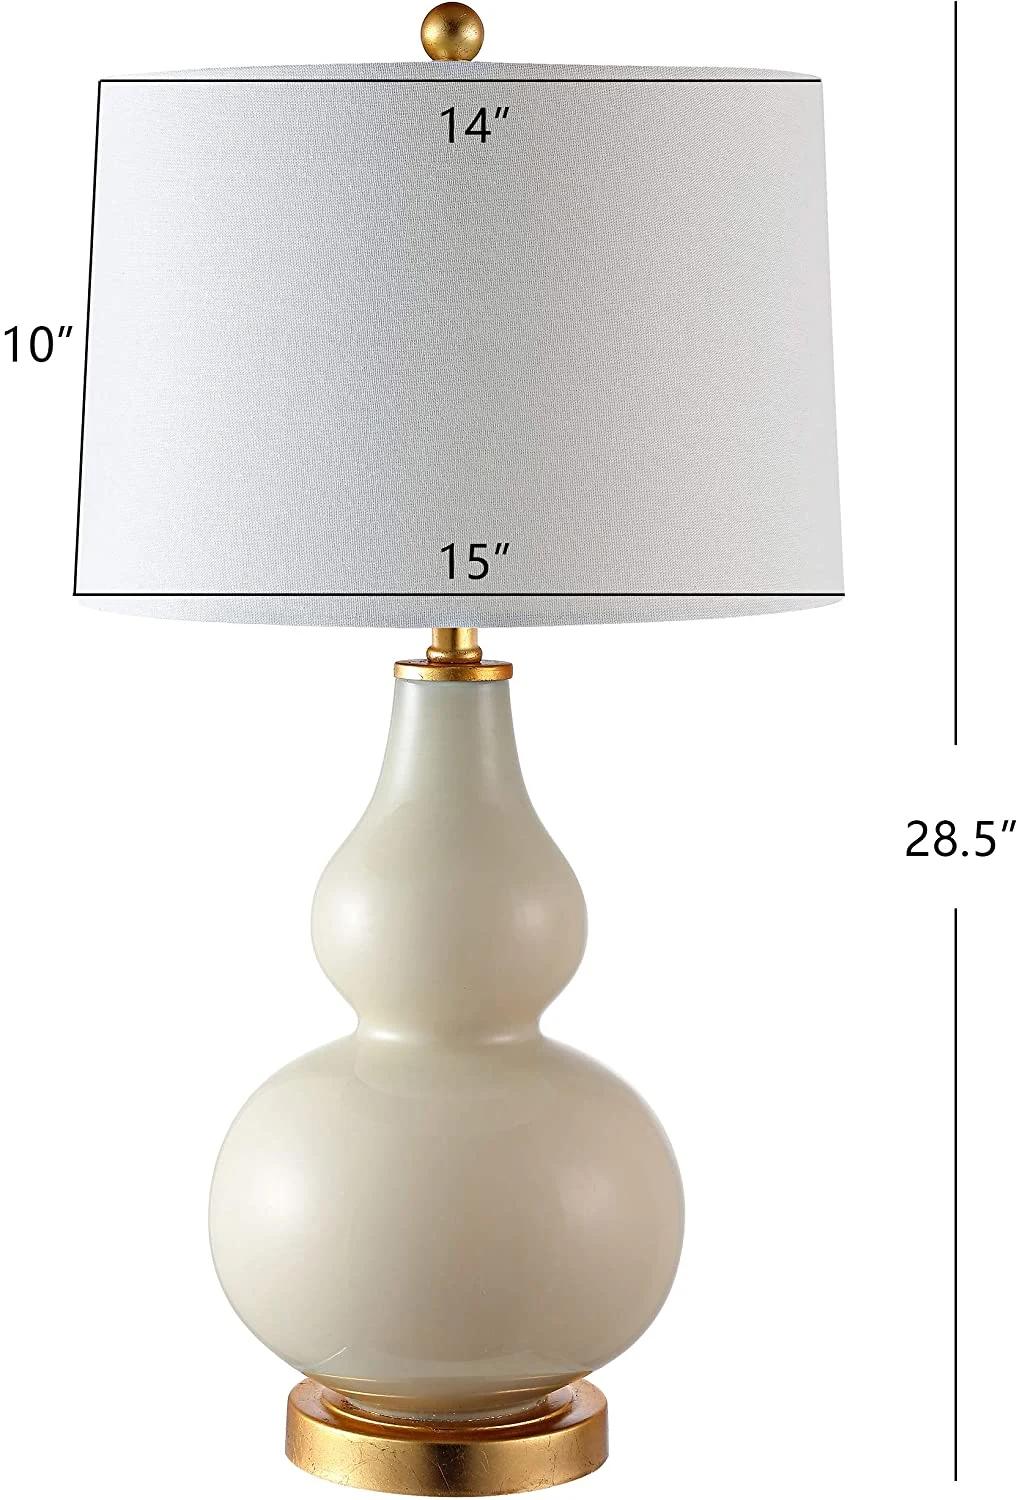 Europe Home Decor off White Porcelain Table Lamp for Bed Room Ceramic Table Lamp